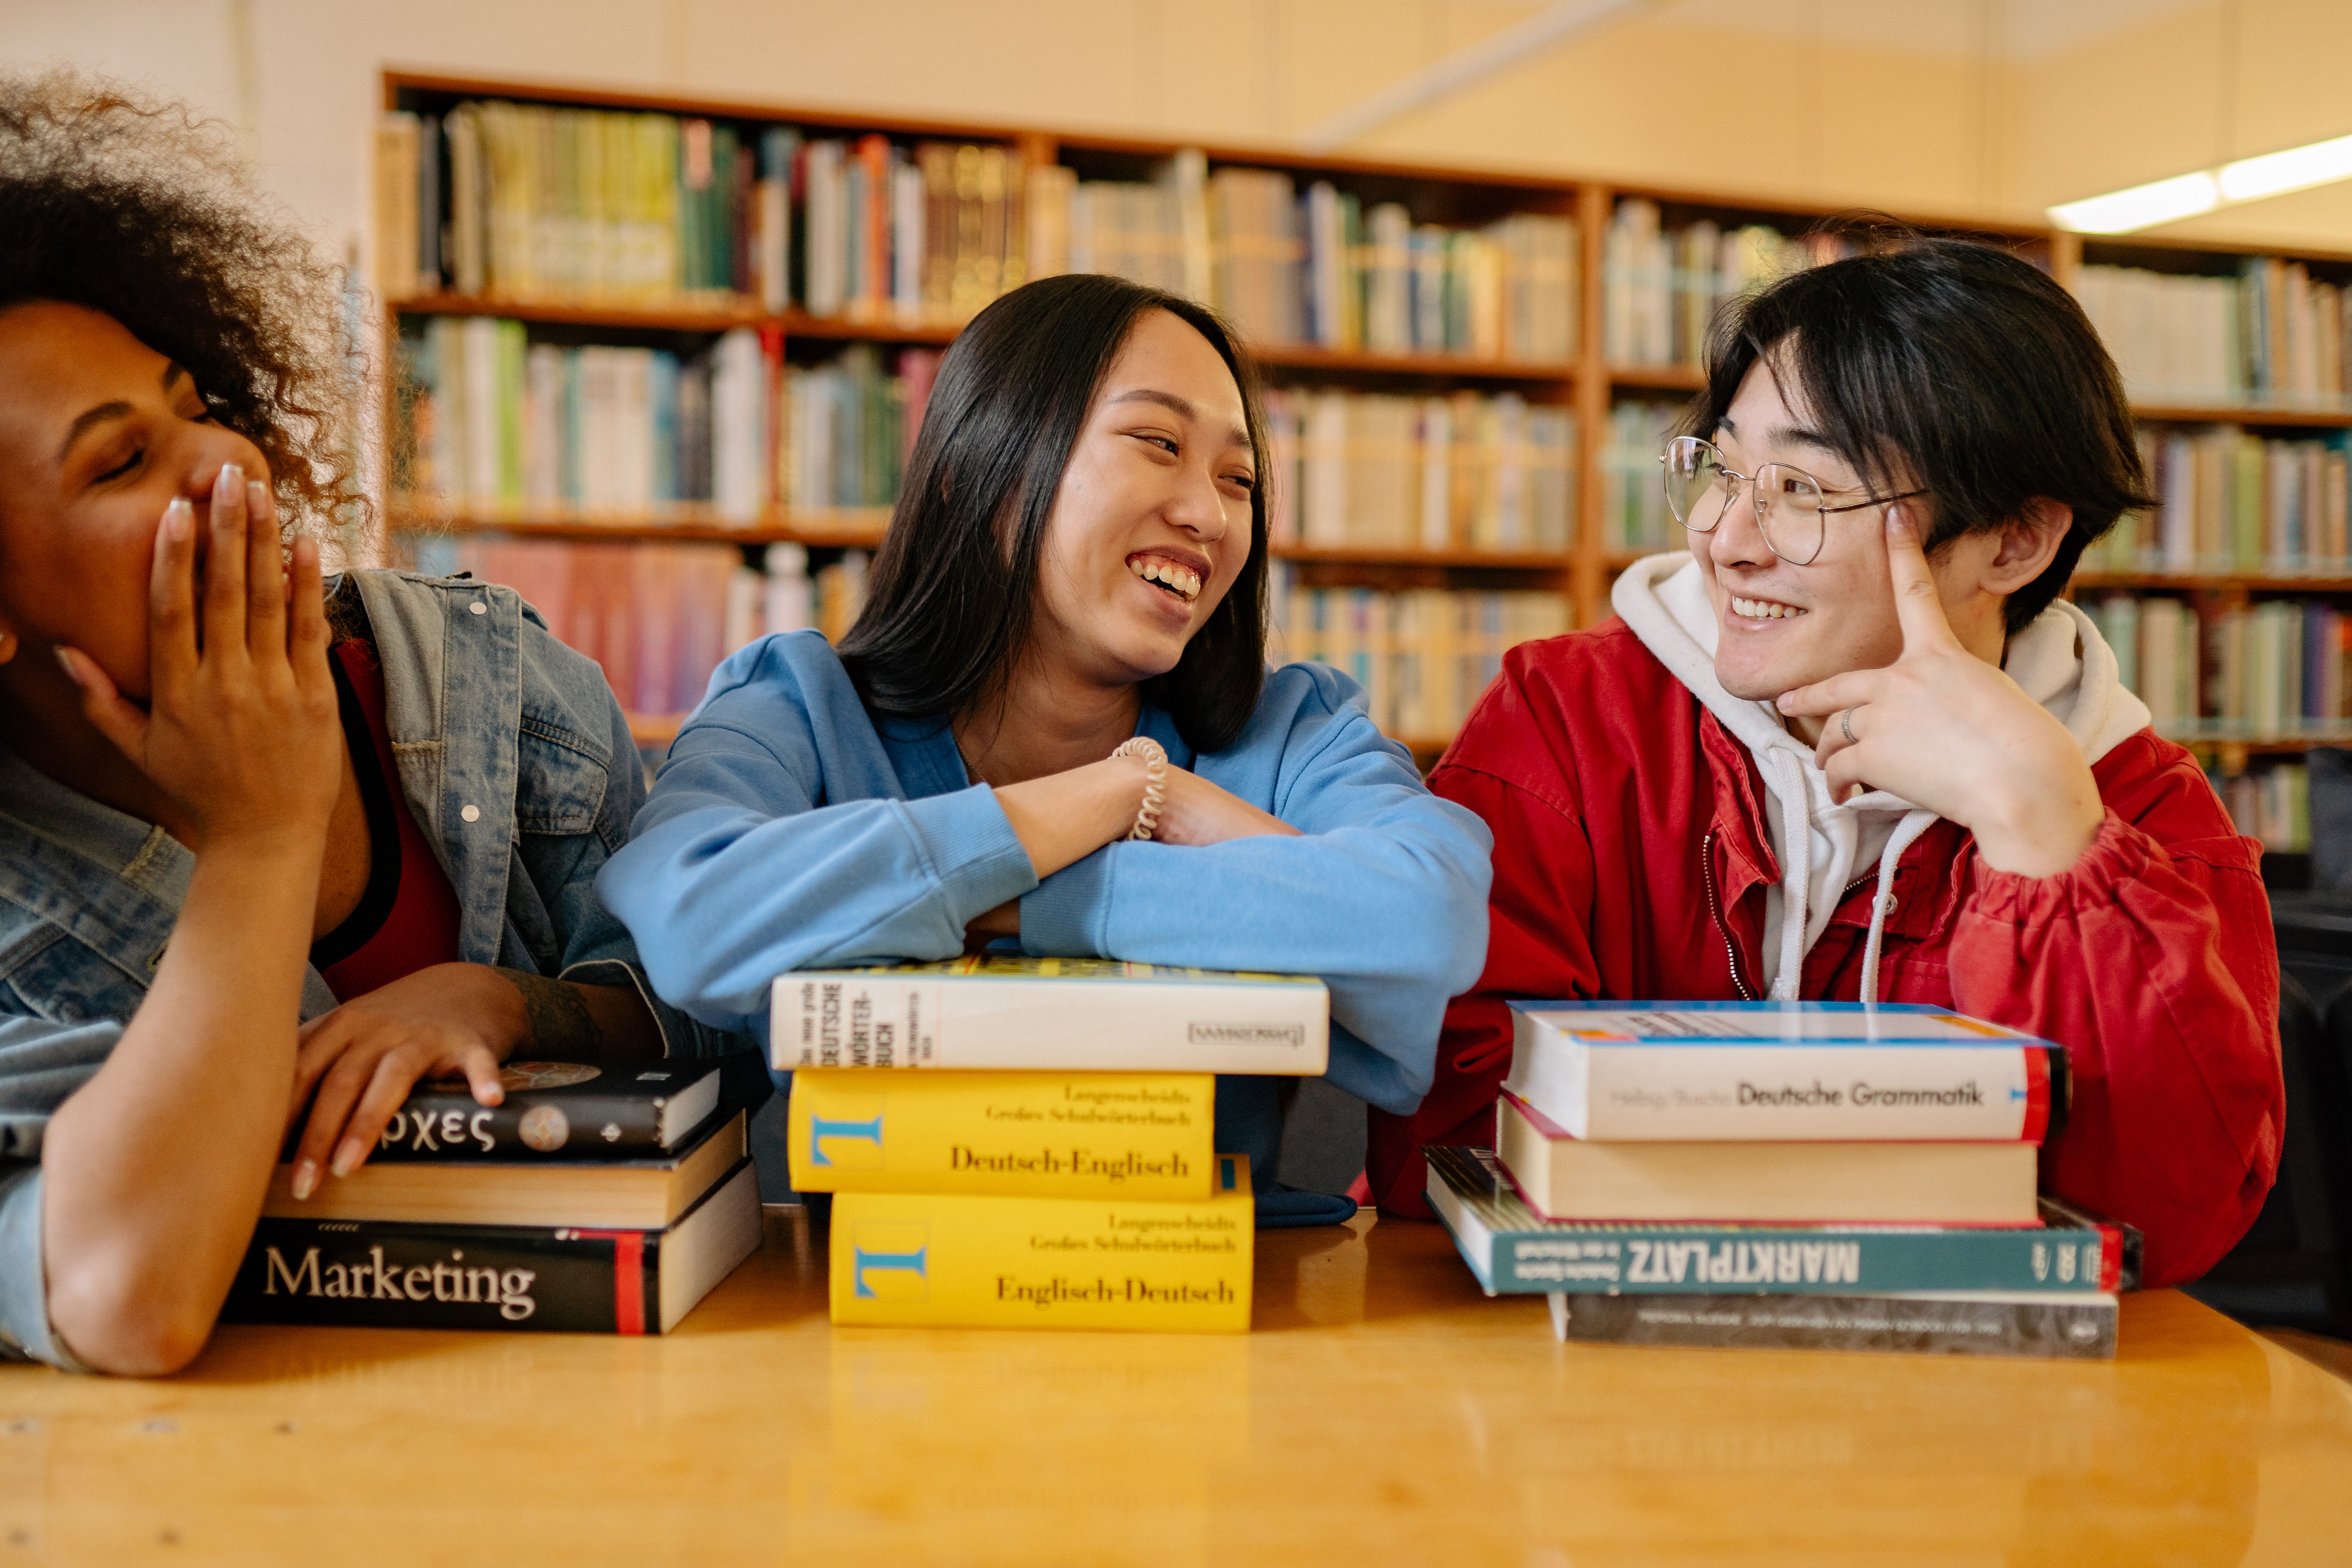 Three young people with stack of books in front of each of them